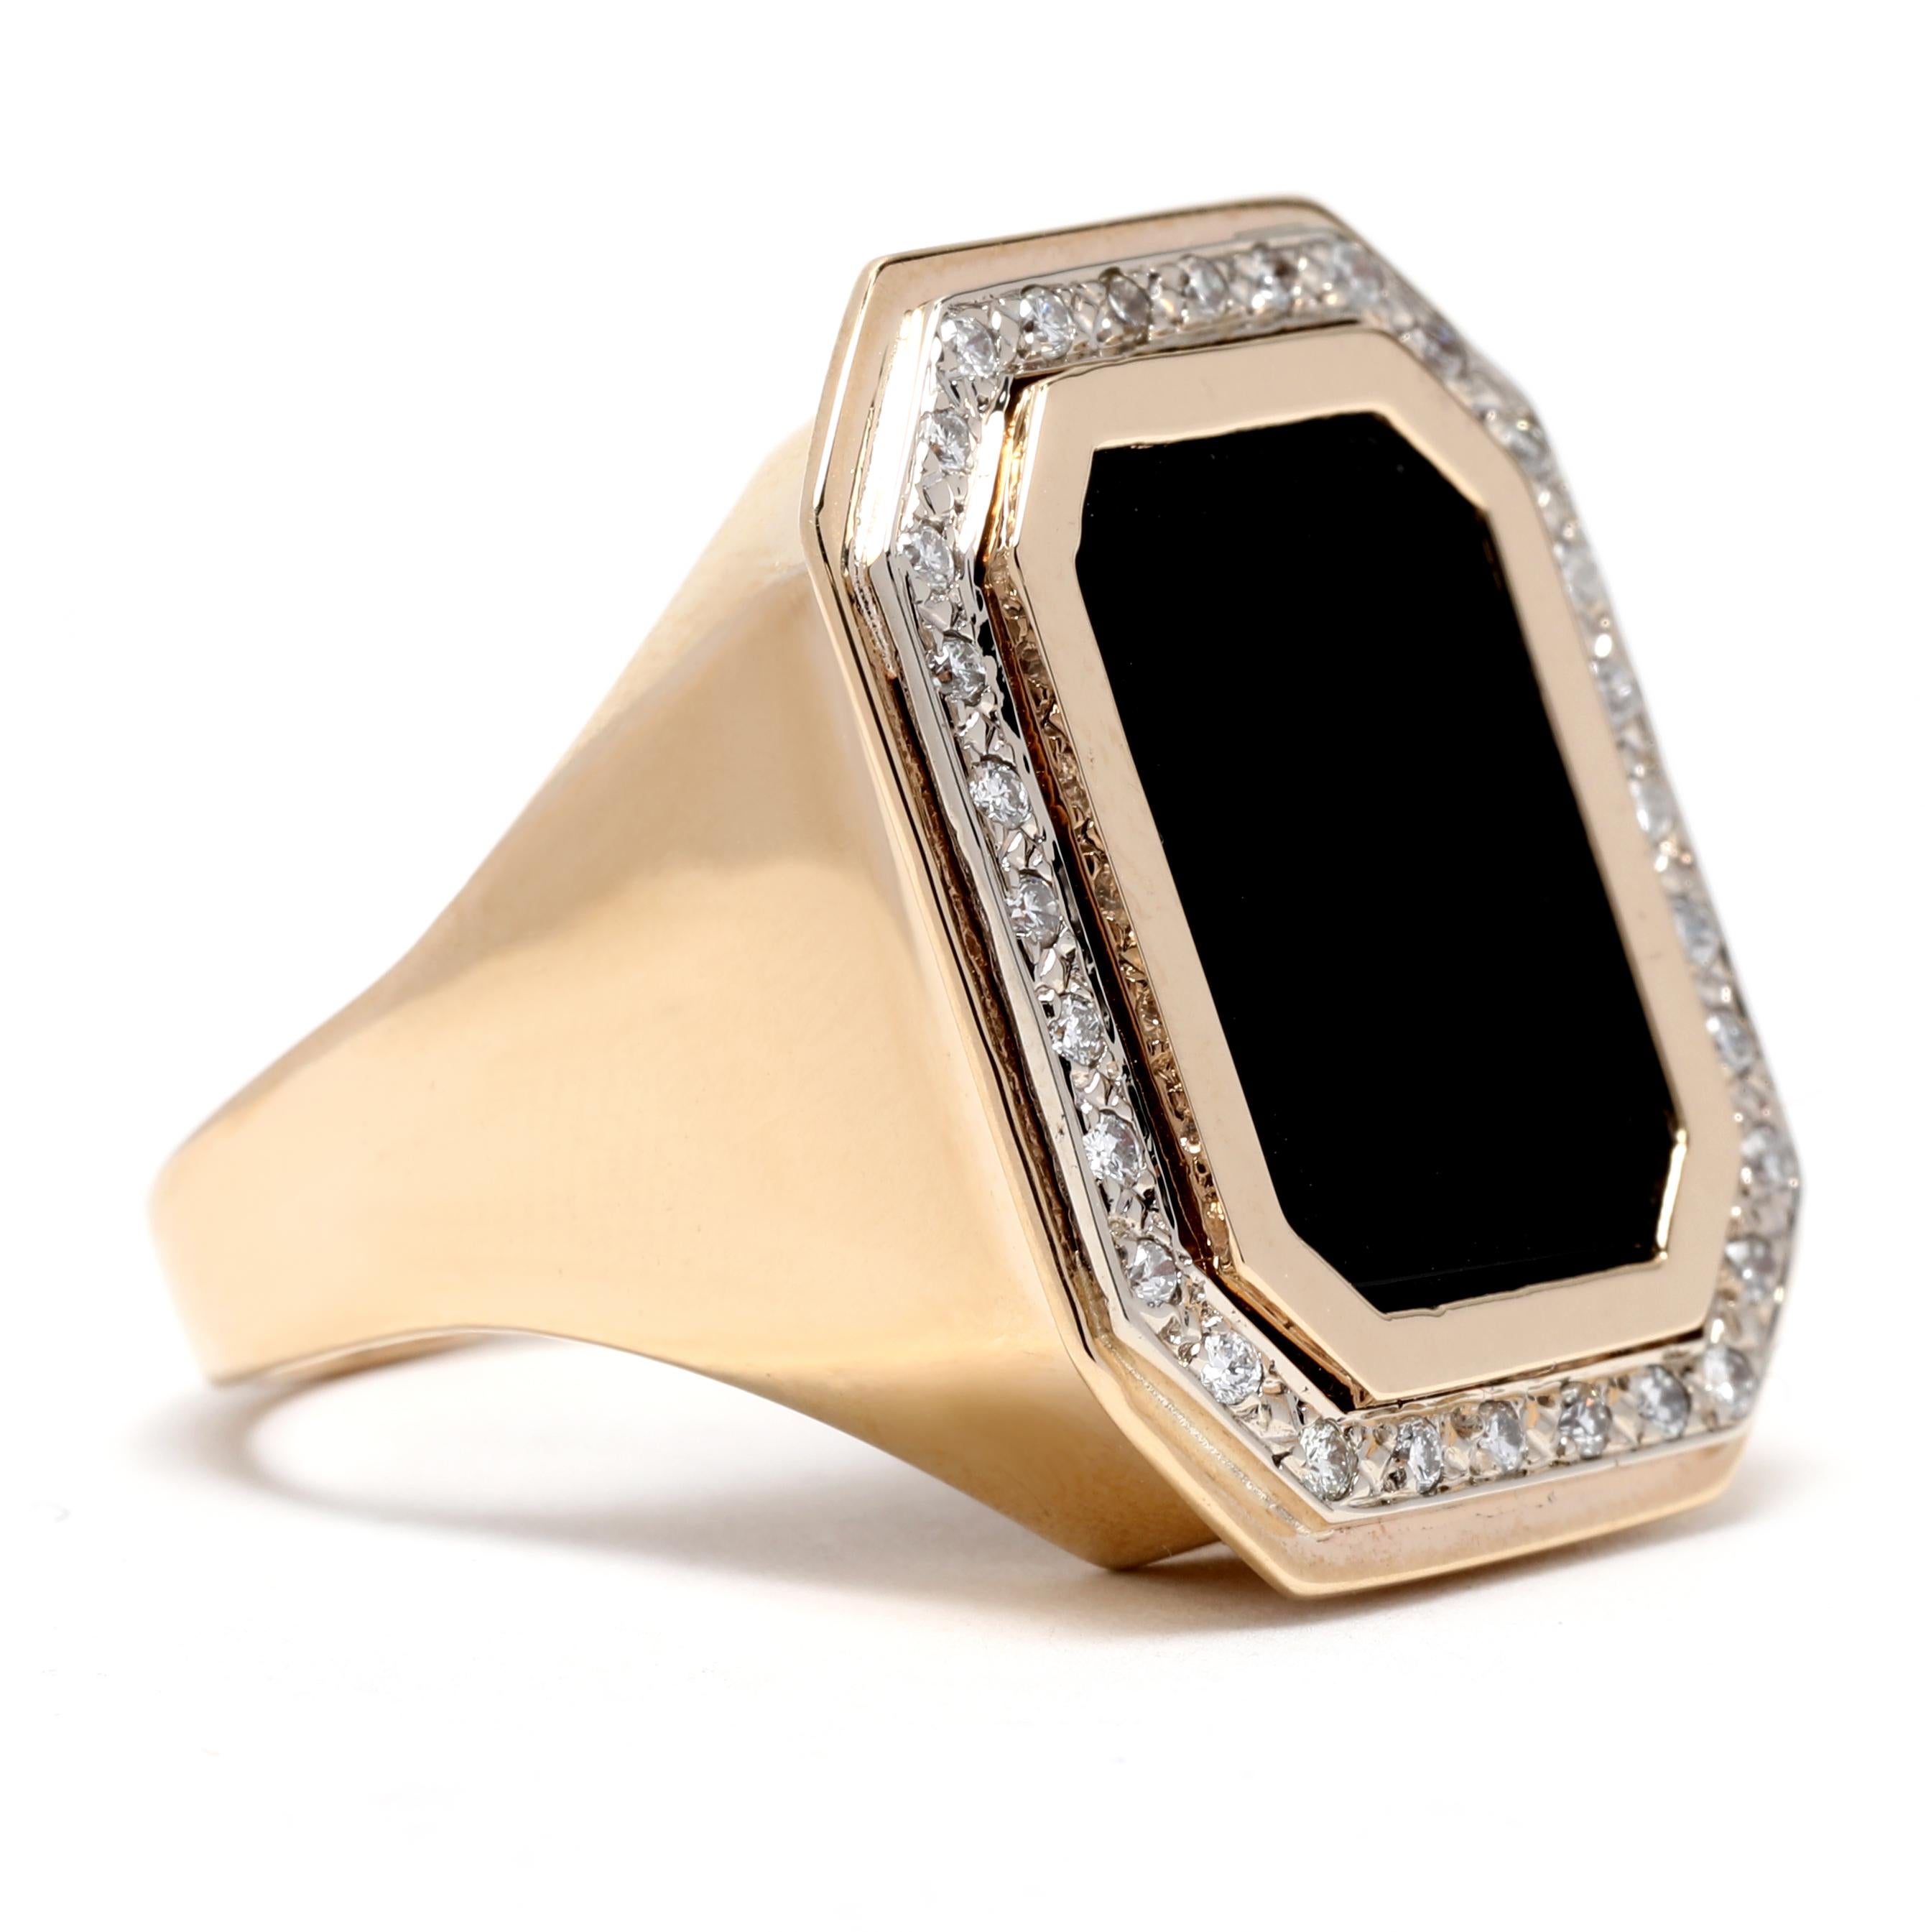 This 0.30ctw large black onyx diamond signet ring is a stunning addition to any jewelry collection. Crafted in 14K yellow gold, this ring features a round black onyx center stone surrounded by diamond accents. The perfect accessory for any occasion,